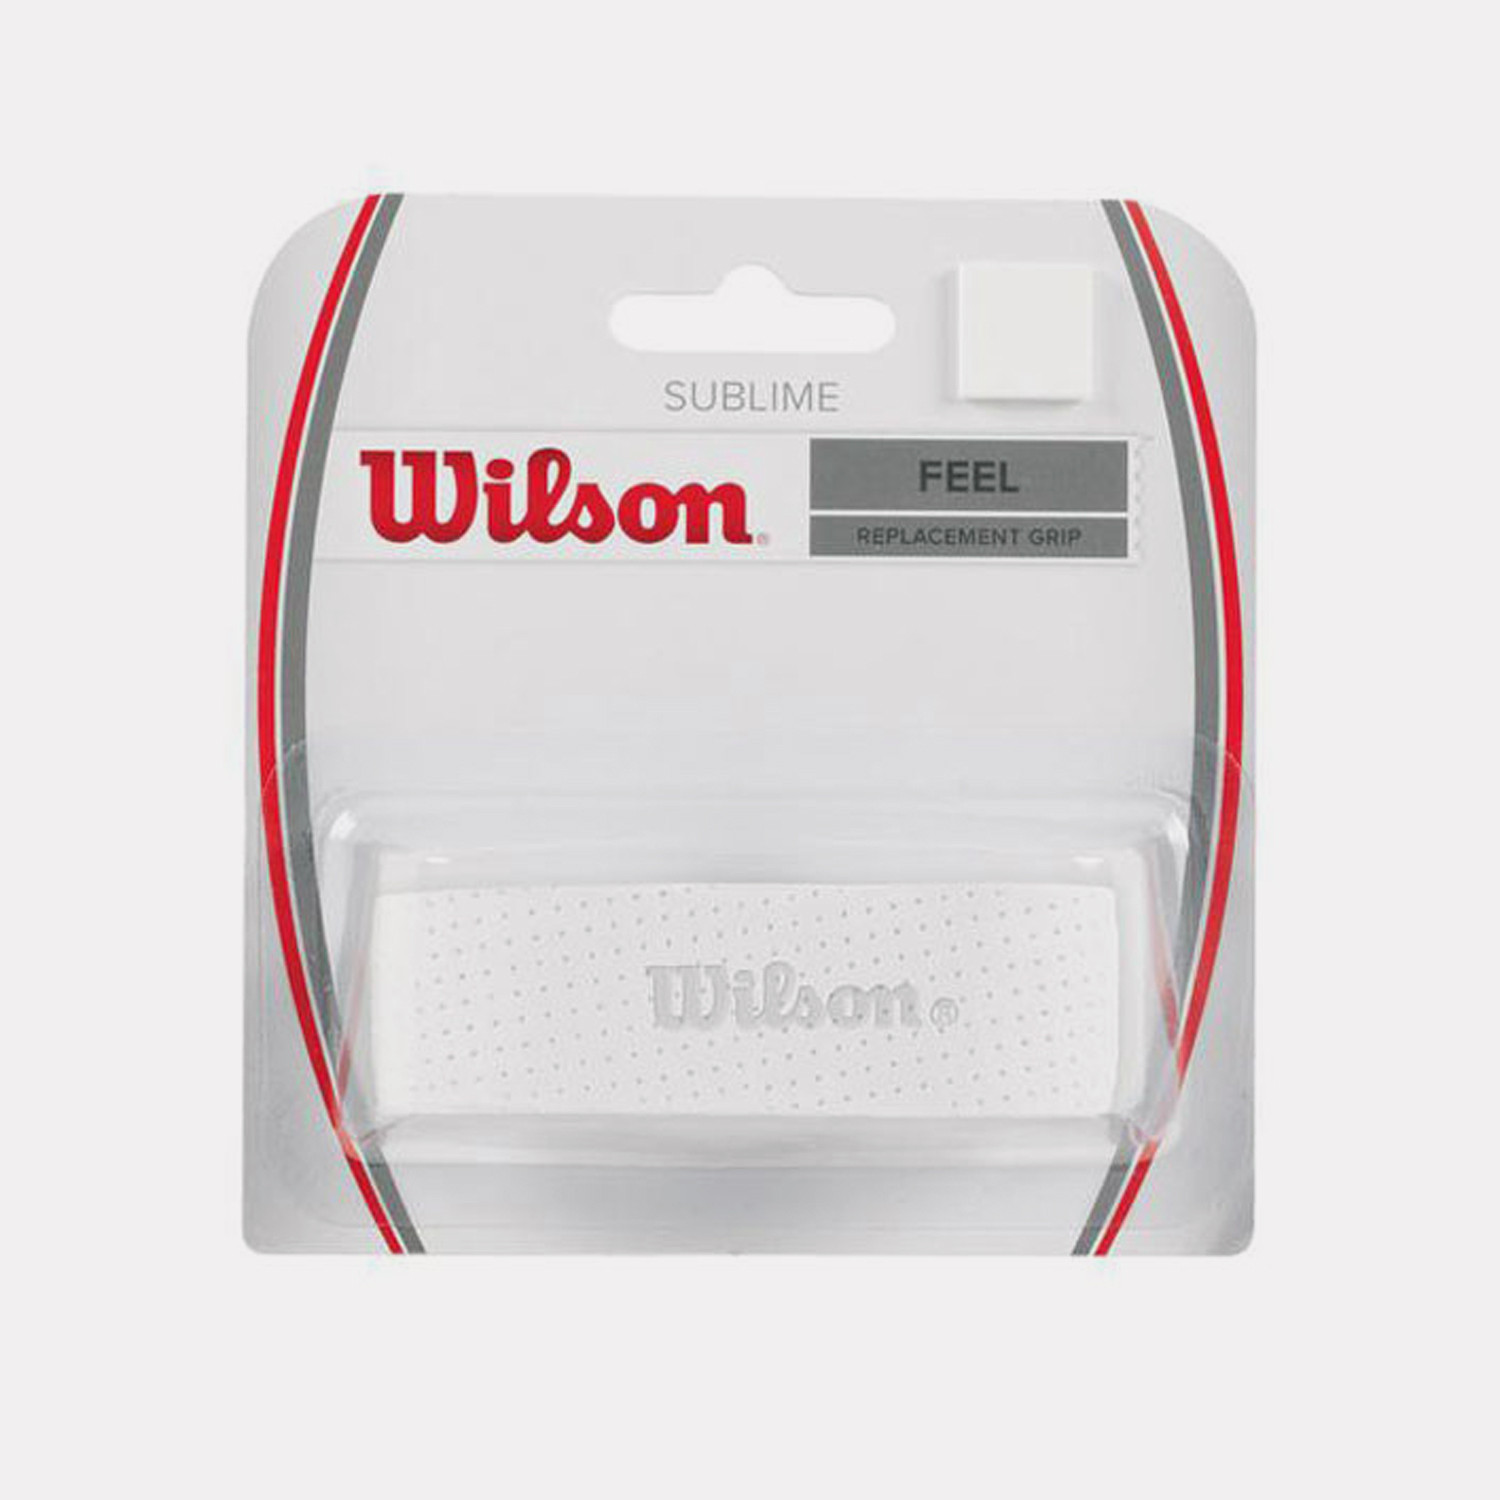 Wilson Sublime Replacement Grip (9000079885_1539)